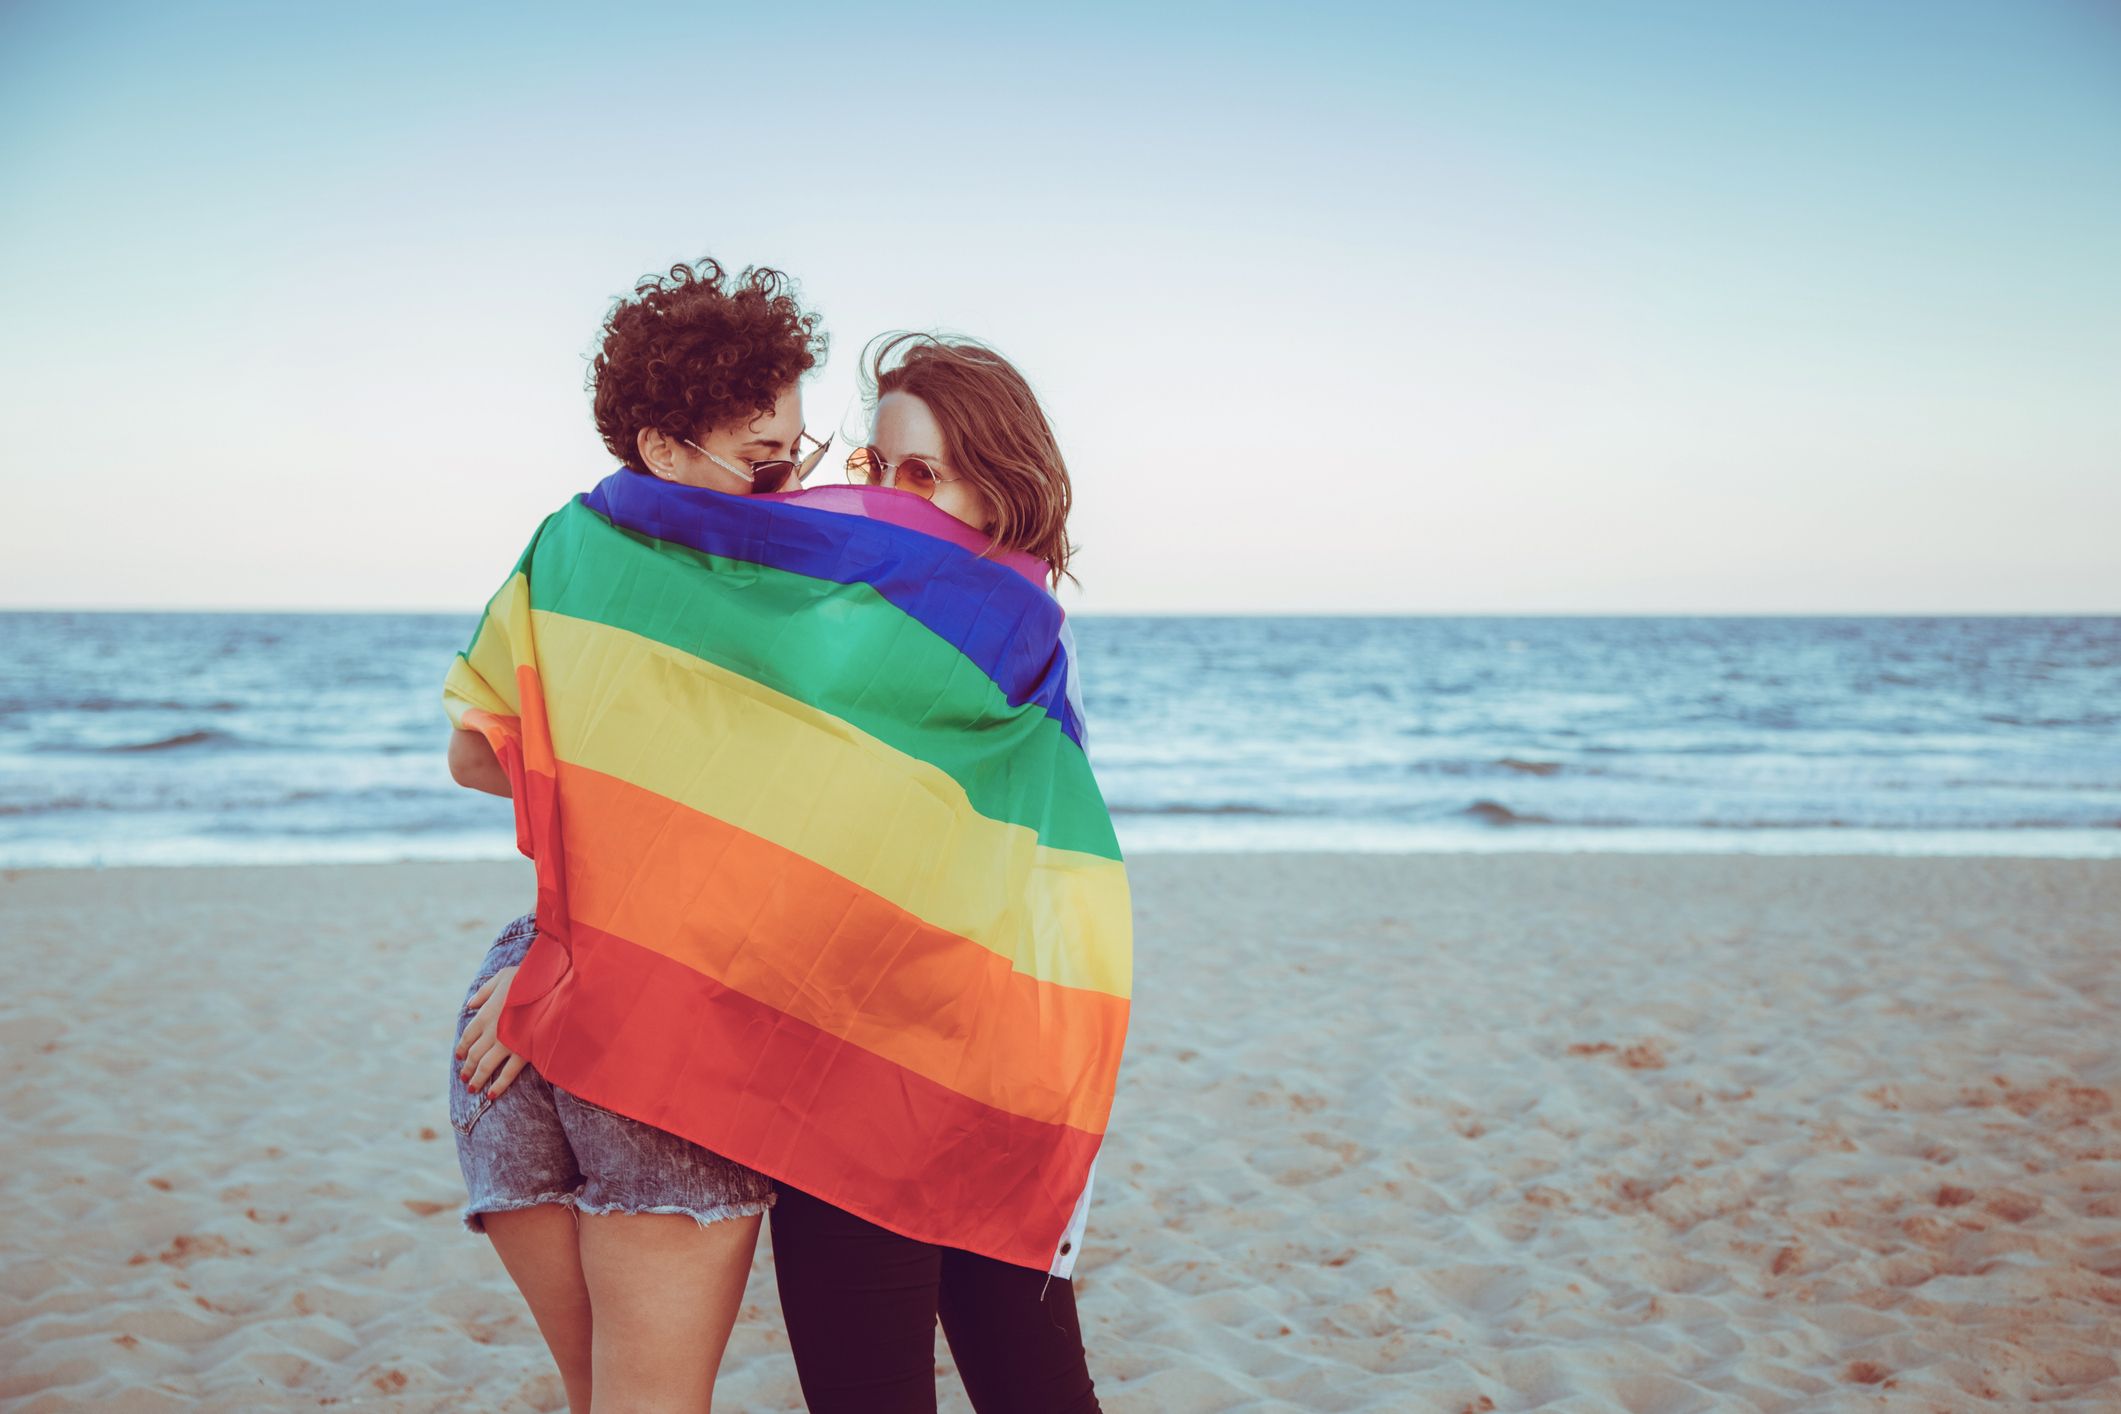 Nude Beach Orgy Party - Am I Bisexual?' 10 Bisexuality Signs, According To Experts